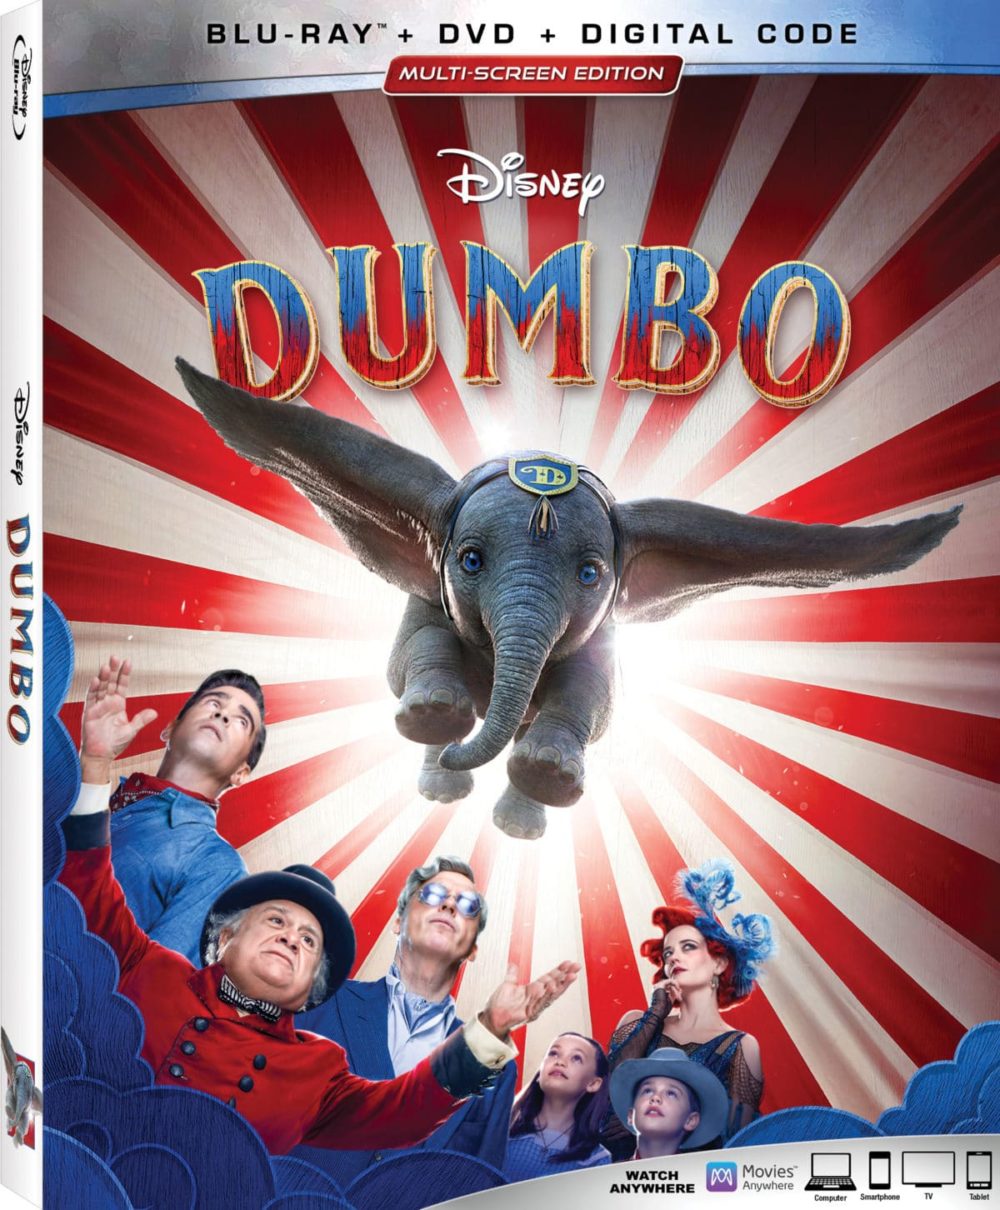 DUMBO, the grand live-action adventure from Disney, which expanded on the beloved animated classic, prepares for a landing on June 25.